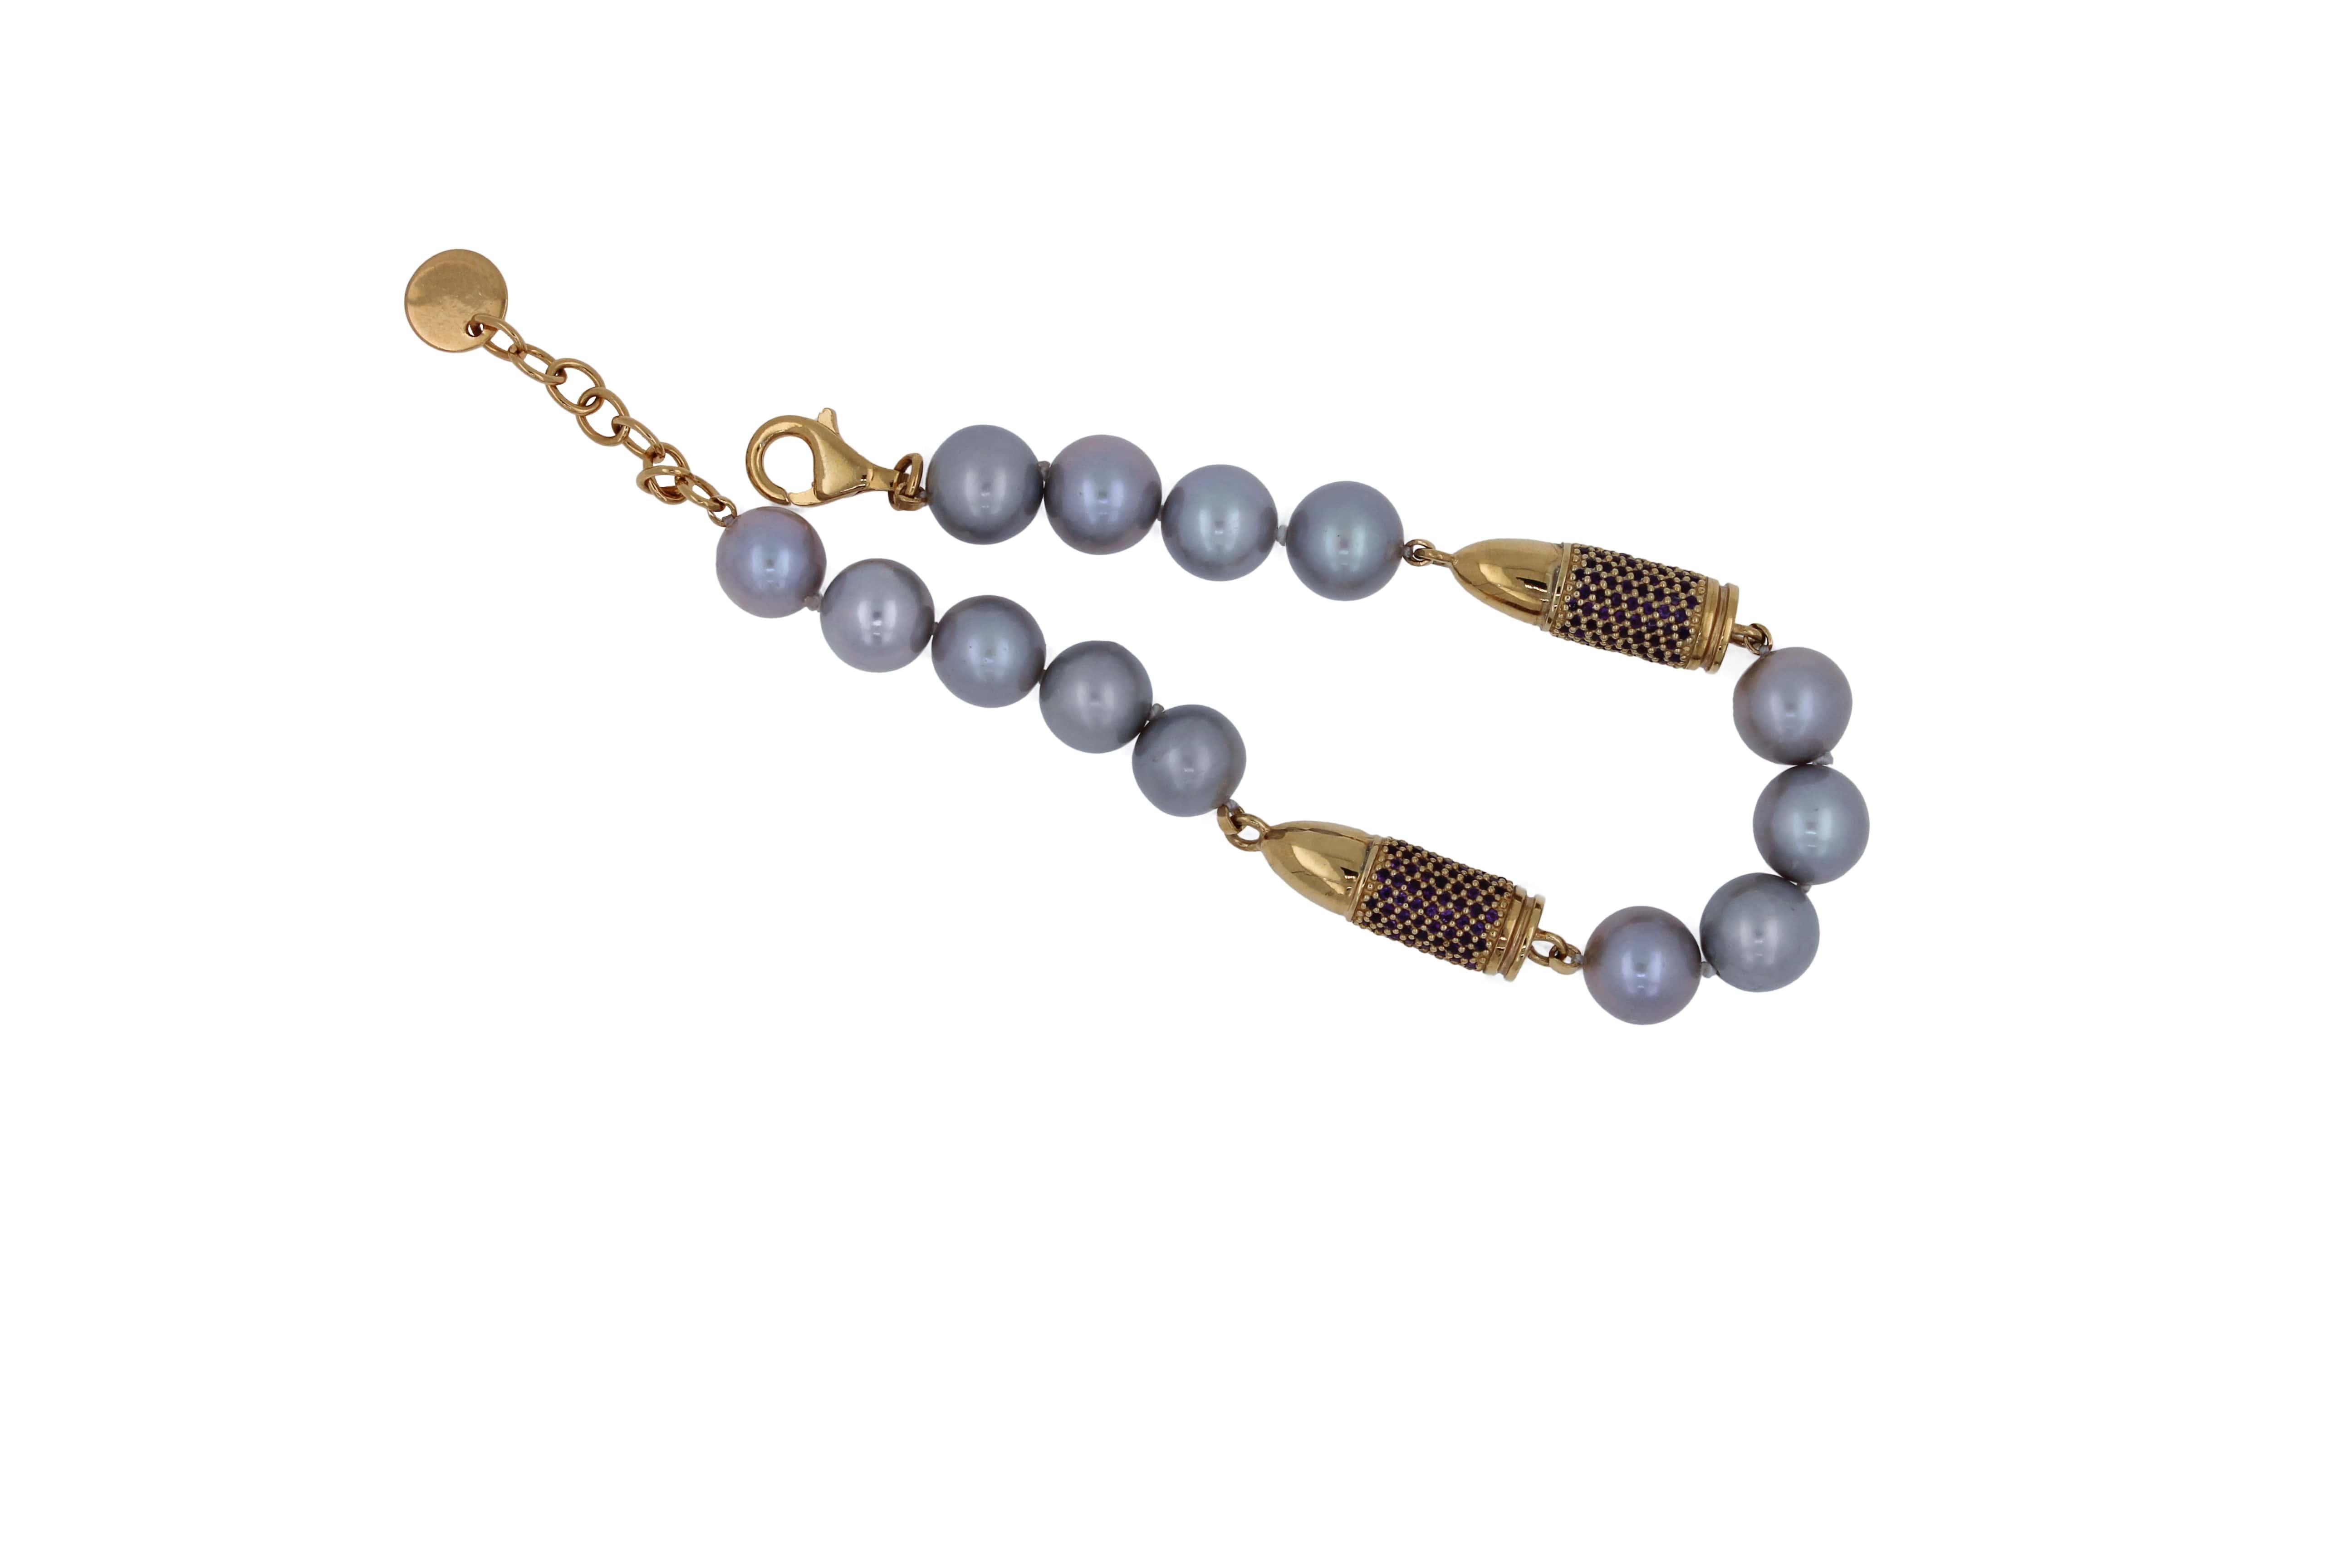 Purple Amethyst Pave Set Gold Rocket Bullet Grey Pearl Silver Vermeil Bracelet
*Genuine Purple Amethysts Gemstones 2.50 CTW Natural
* Natural Grey Pearls
* 18K Yellow Gold Vermeil
* 7 to 8.7 Inches Adjustable Clasp
* In-Stock & Ready to Ship
